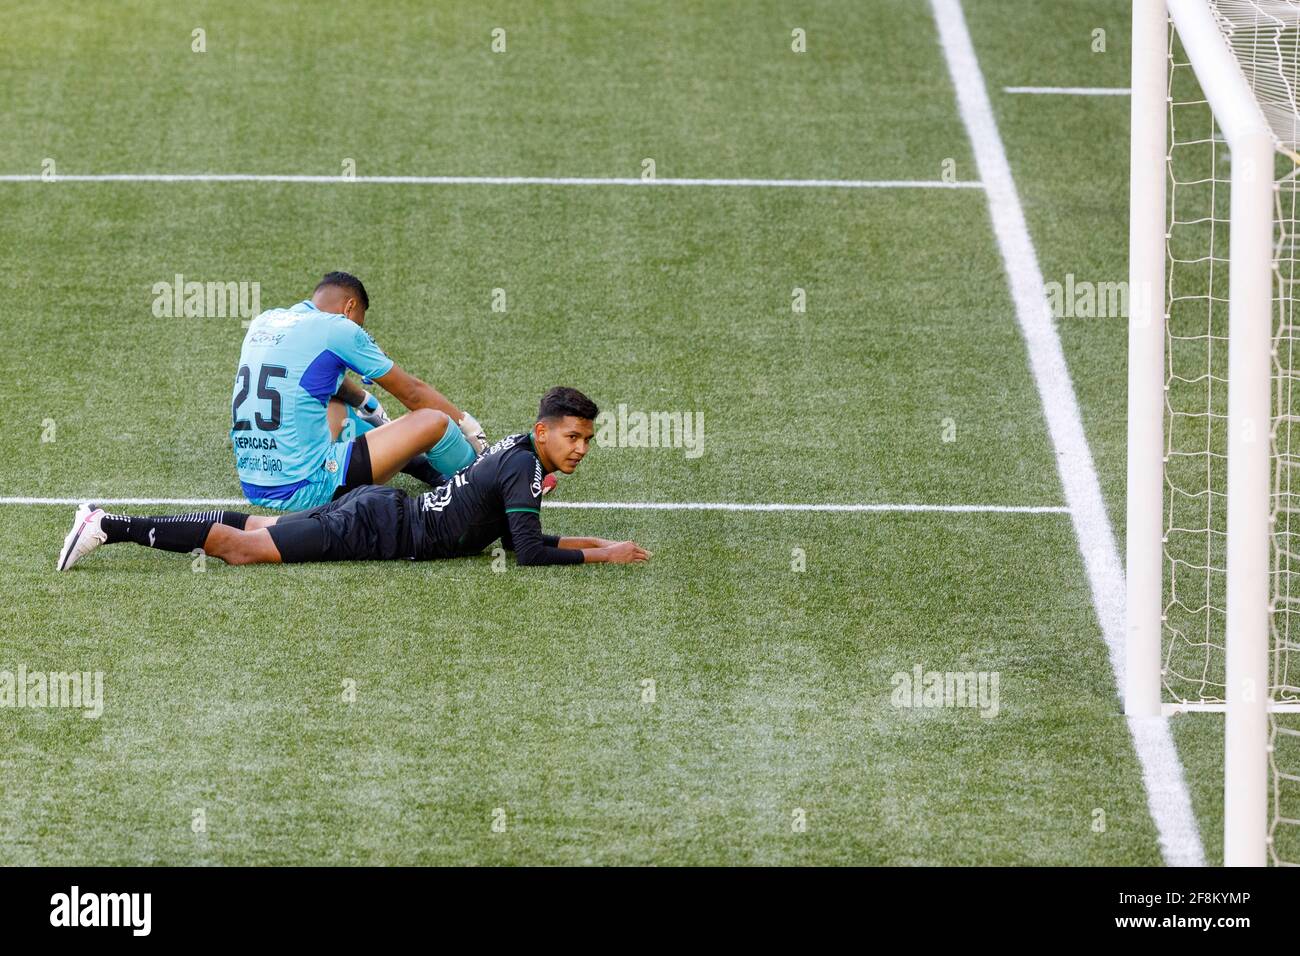 Portland, USA. 13th Apr, 2021. Goalkeeper Denovan Torres sits dejectedly after the Timbers' fifth goal. The Portland Timbers trounced Honduras' CD Marathon 5-0 on April 13, 2021 in Portland, Oregon, including a hat trick by Yimmy Chara, in their second meeting in the CONCACAF round of 16. Their first meeting last week in Honduras was a 2-2 tie. (Photo by John Rudoff/Sipa USA) Credit: Sipa USA/Alamy Live News Stock Photo